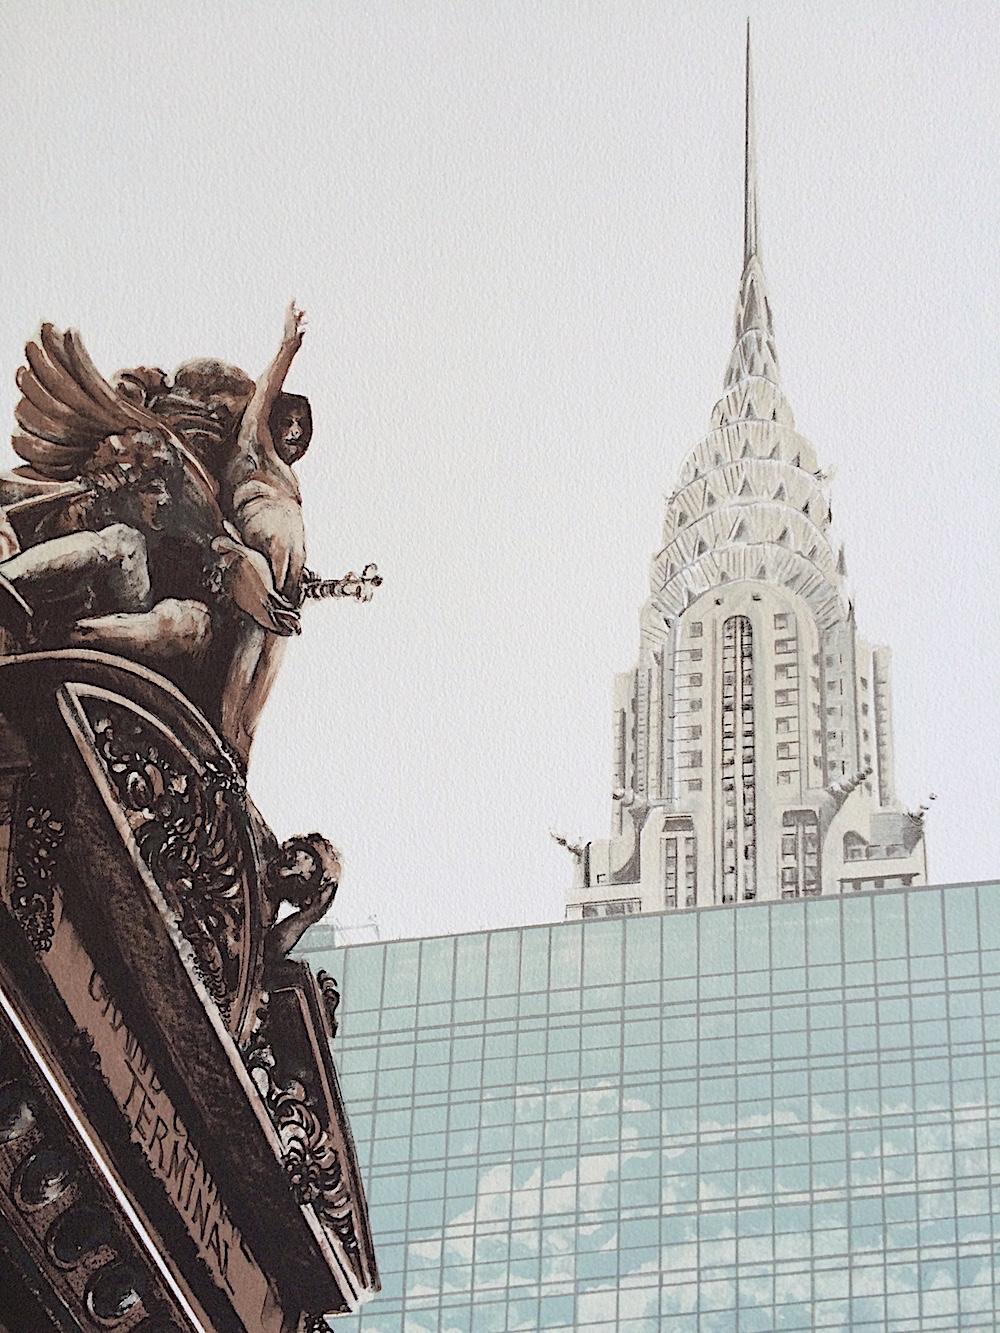 NEW YORK CITY: GRAND HYATT Signed Lithograph NYC Building Grand Central Terminal - Print by Joan Melnick